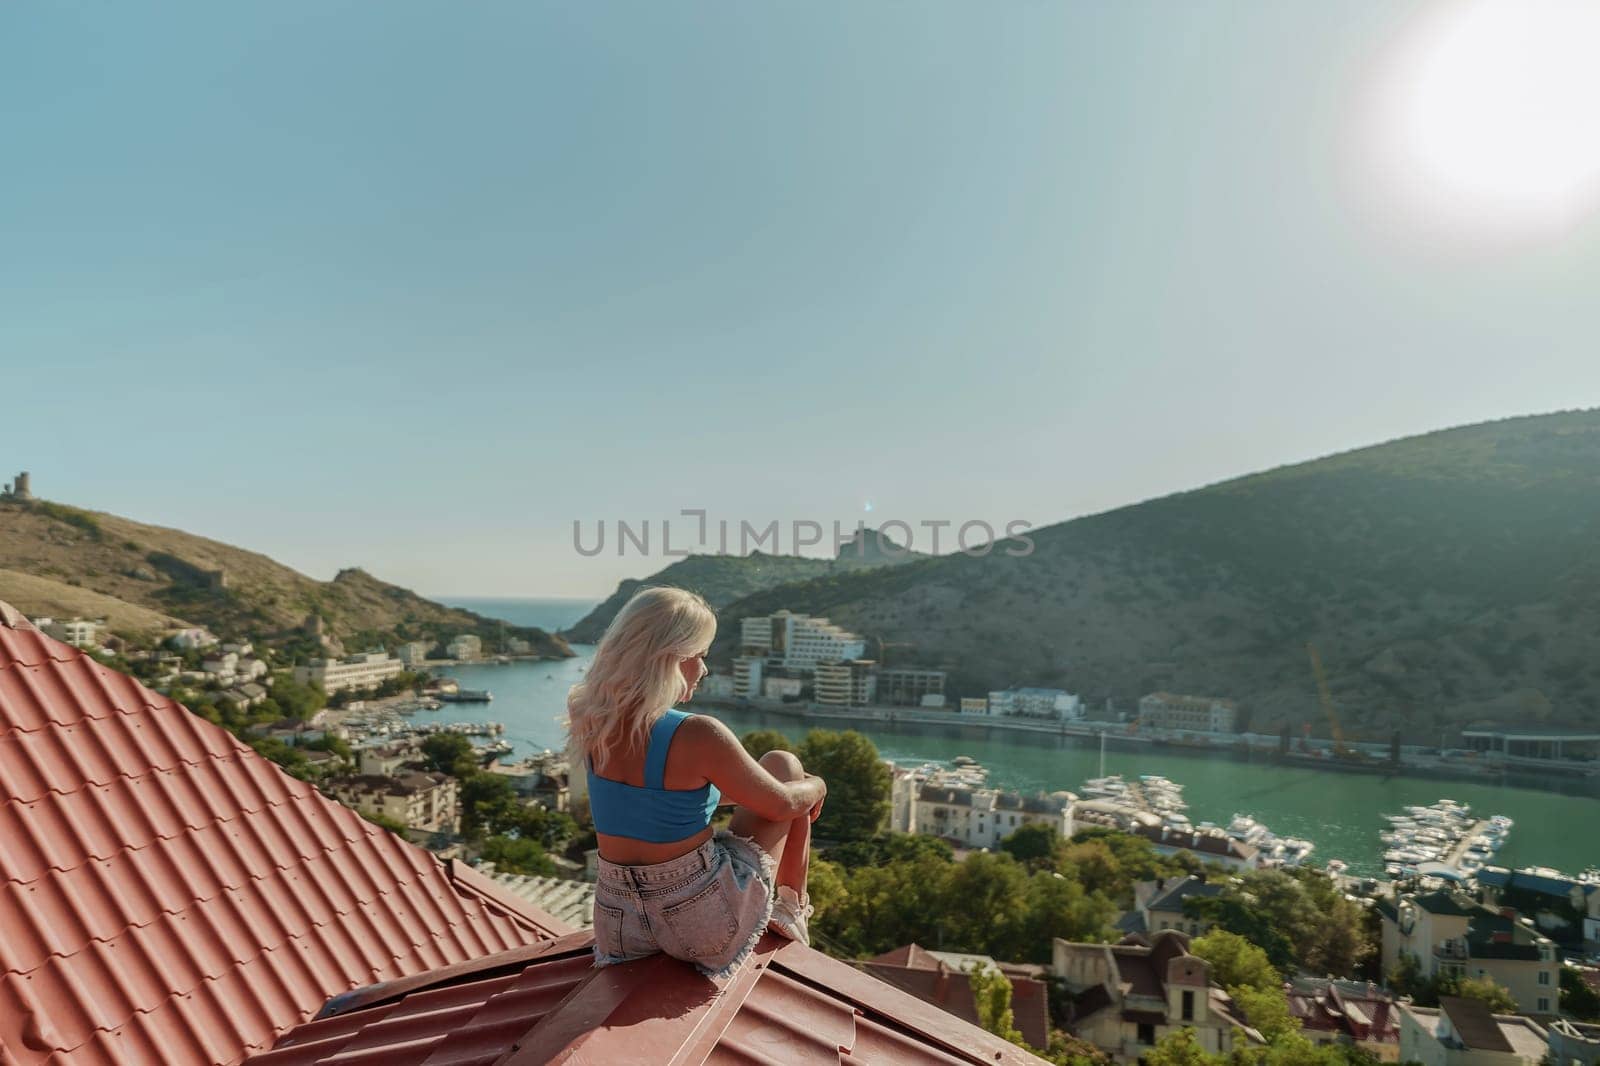 Woman sits on rooftop, enjoys town view and sea mountains. Peaceful rooftop relaxation. Below her, there is a town with several boats visible in the water. Rooftop vantage point. by Matiunina